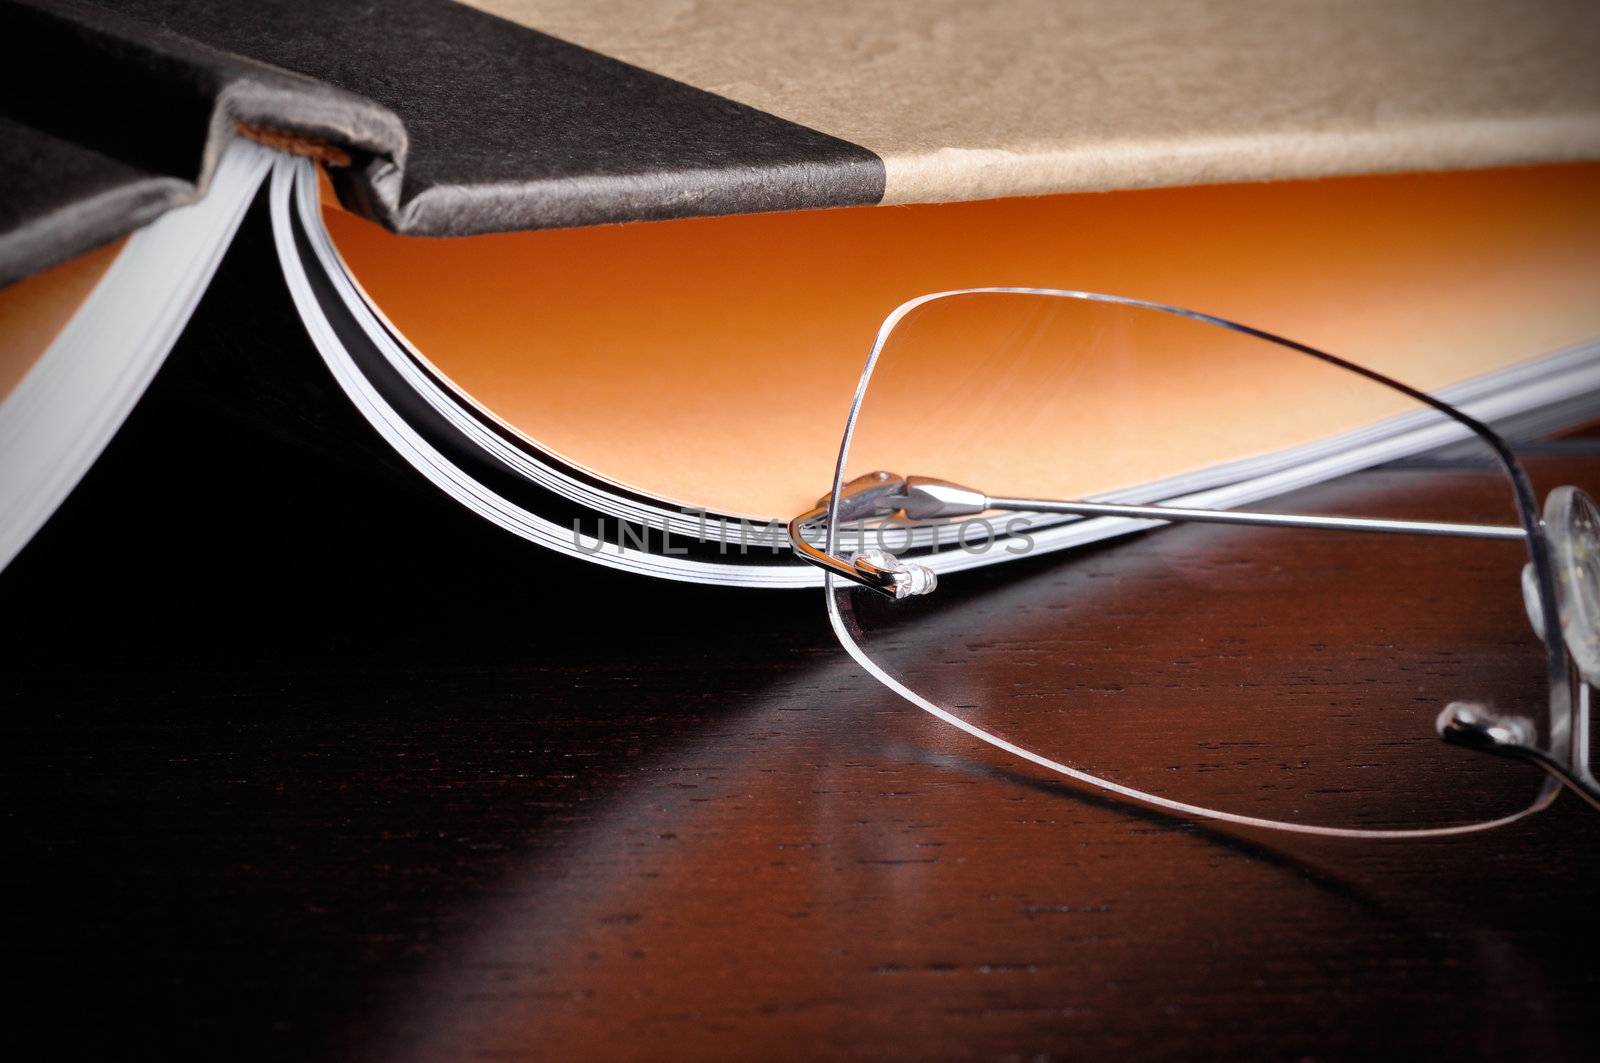 Eyeglasses next to an open book on top of a wood table